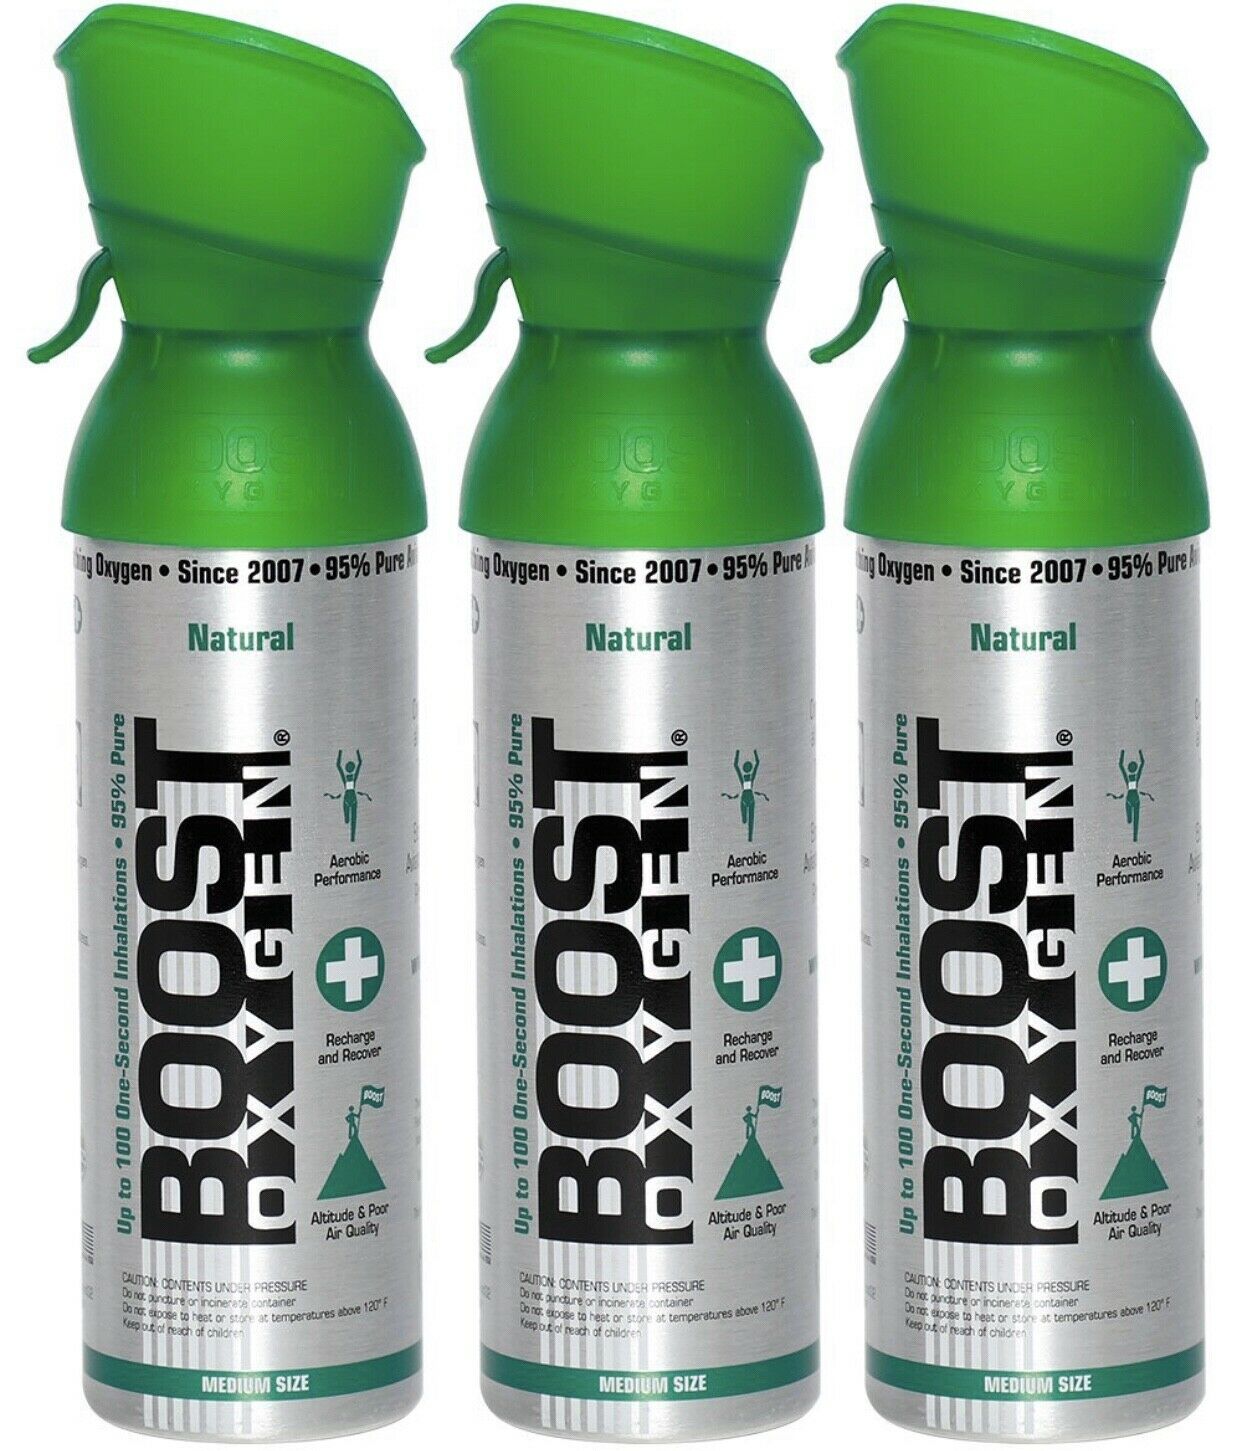 Boost Oxygen Supplement Portable Canister Of Clean Oxygen 3 Pack- Natural Medium